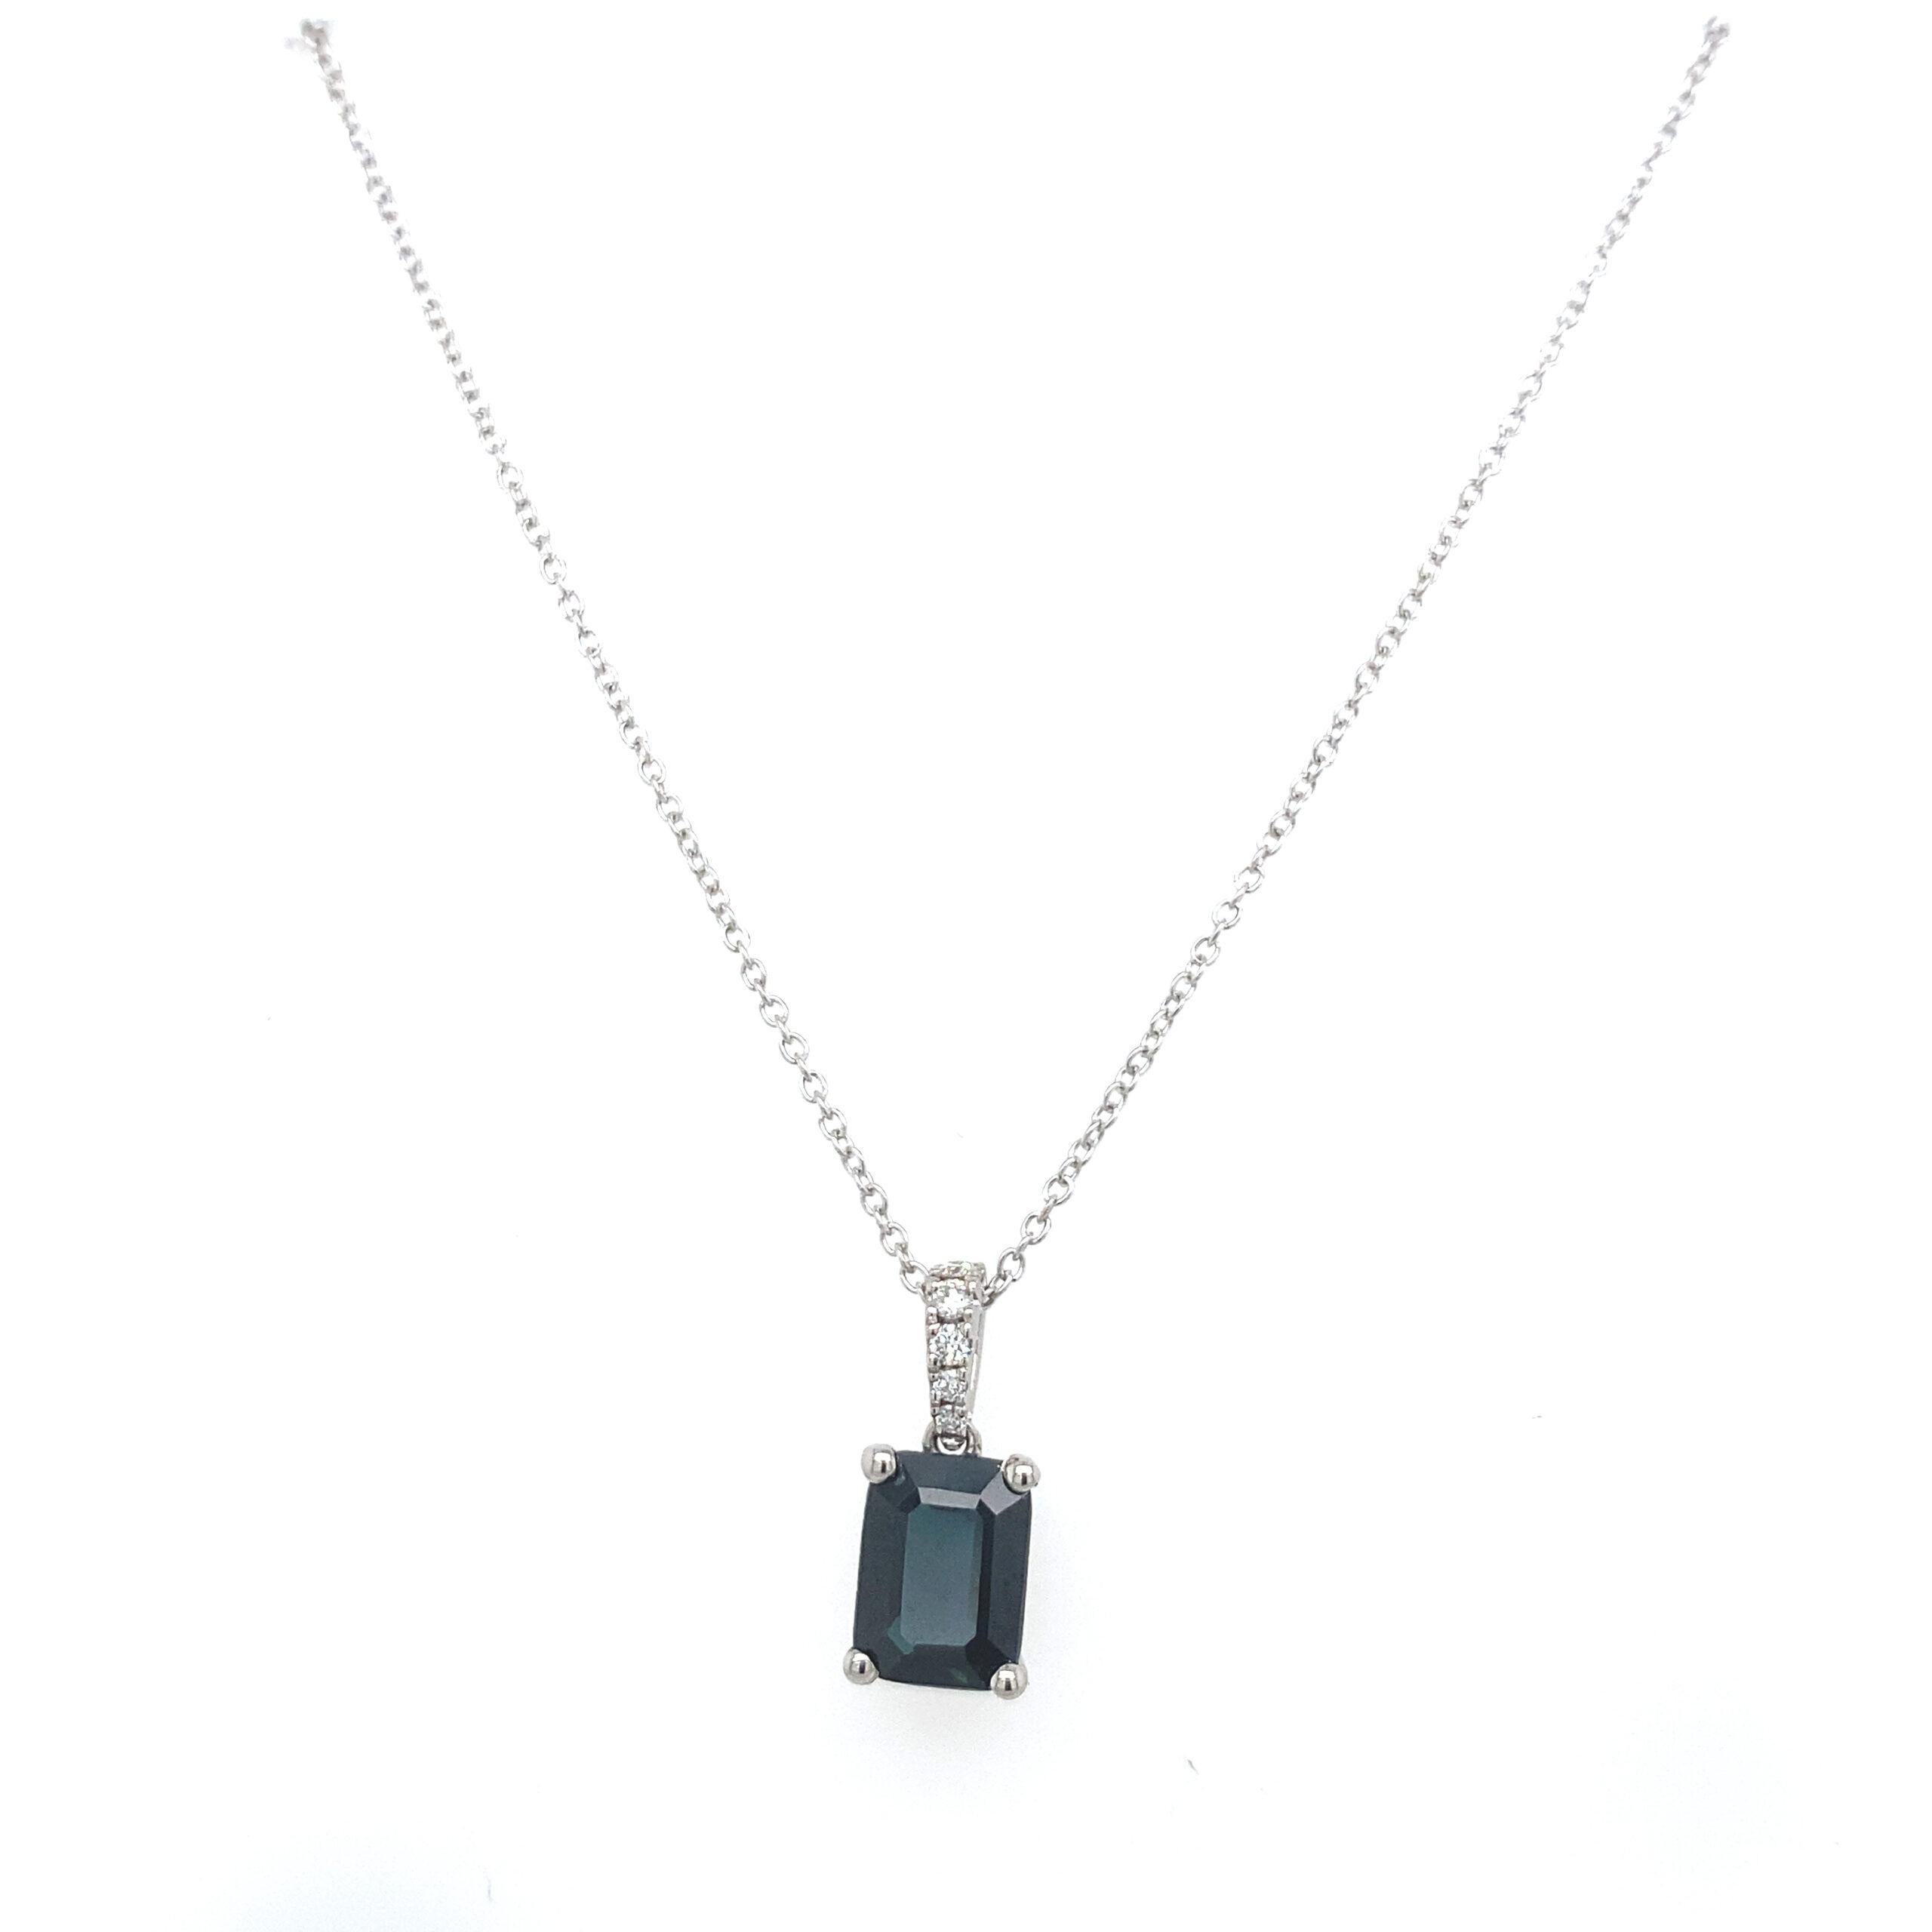 1.86ct Emerald Cut Natural Sapphire Pendant In 18ct White Gold, With 0.06ct of Diamonds

Additional Information:
1.86ct Emerald Cut Natural Sapphire Pendant, Set in 18ct White Gold, With 0.06ct of Diamonds On a 16/18